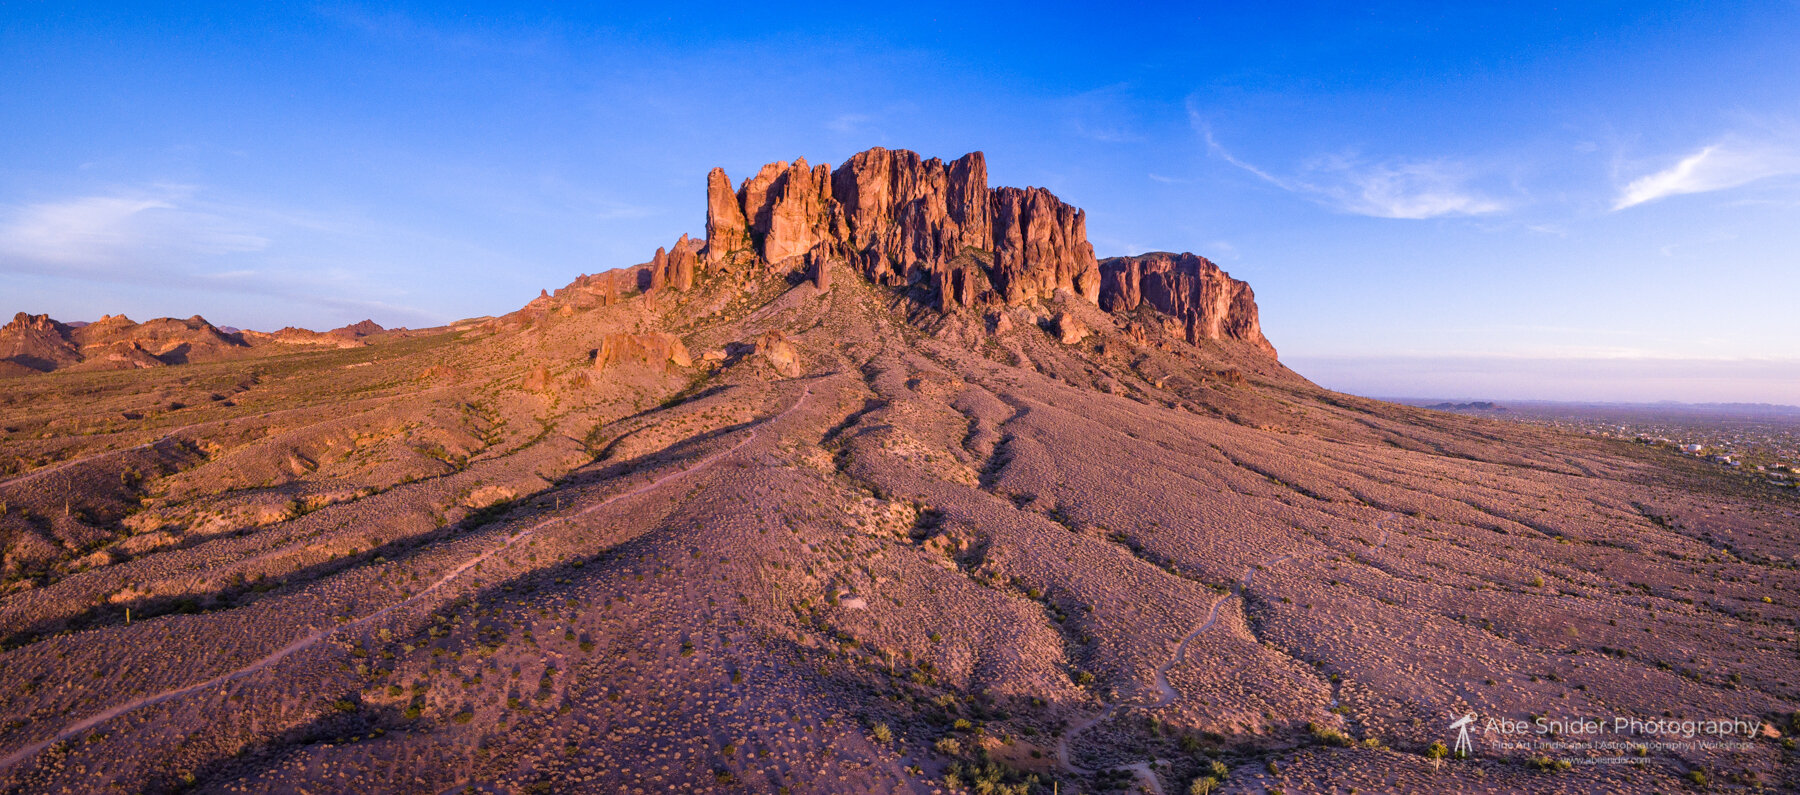 Aerial View Of Lost Dutchman